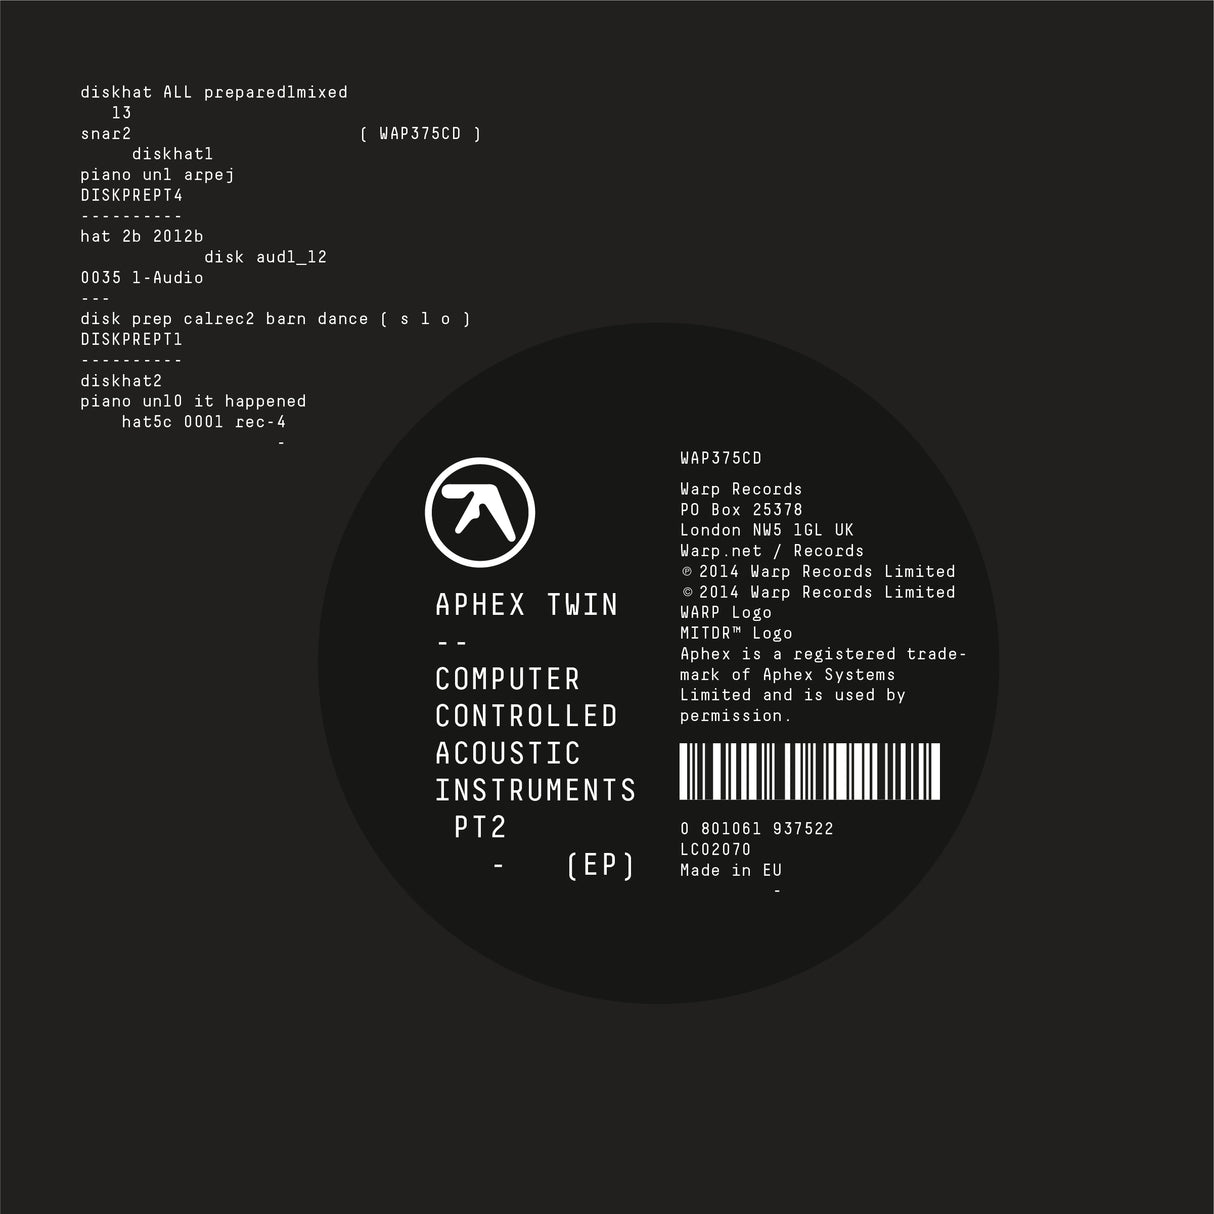 Aphex Twin - Computer Controlled Acoustic Instruments pt 2 EP [CD]